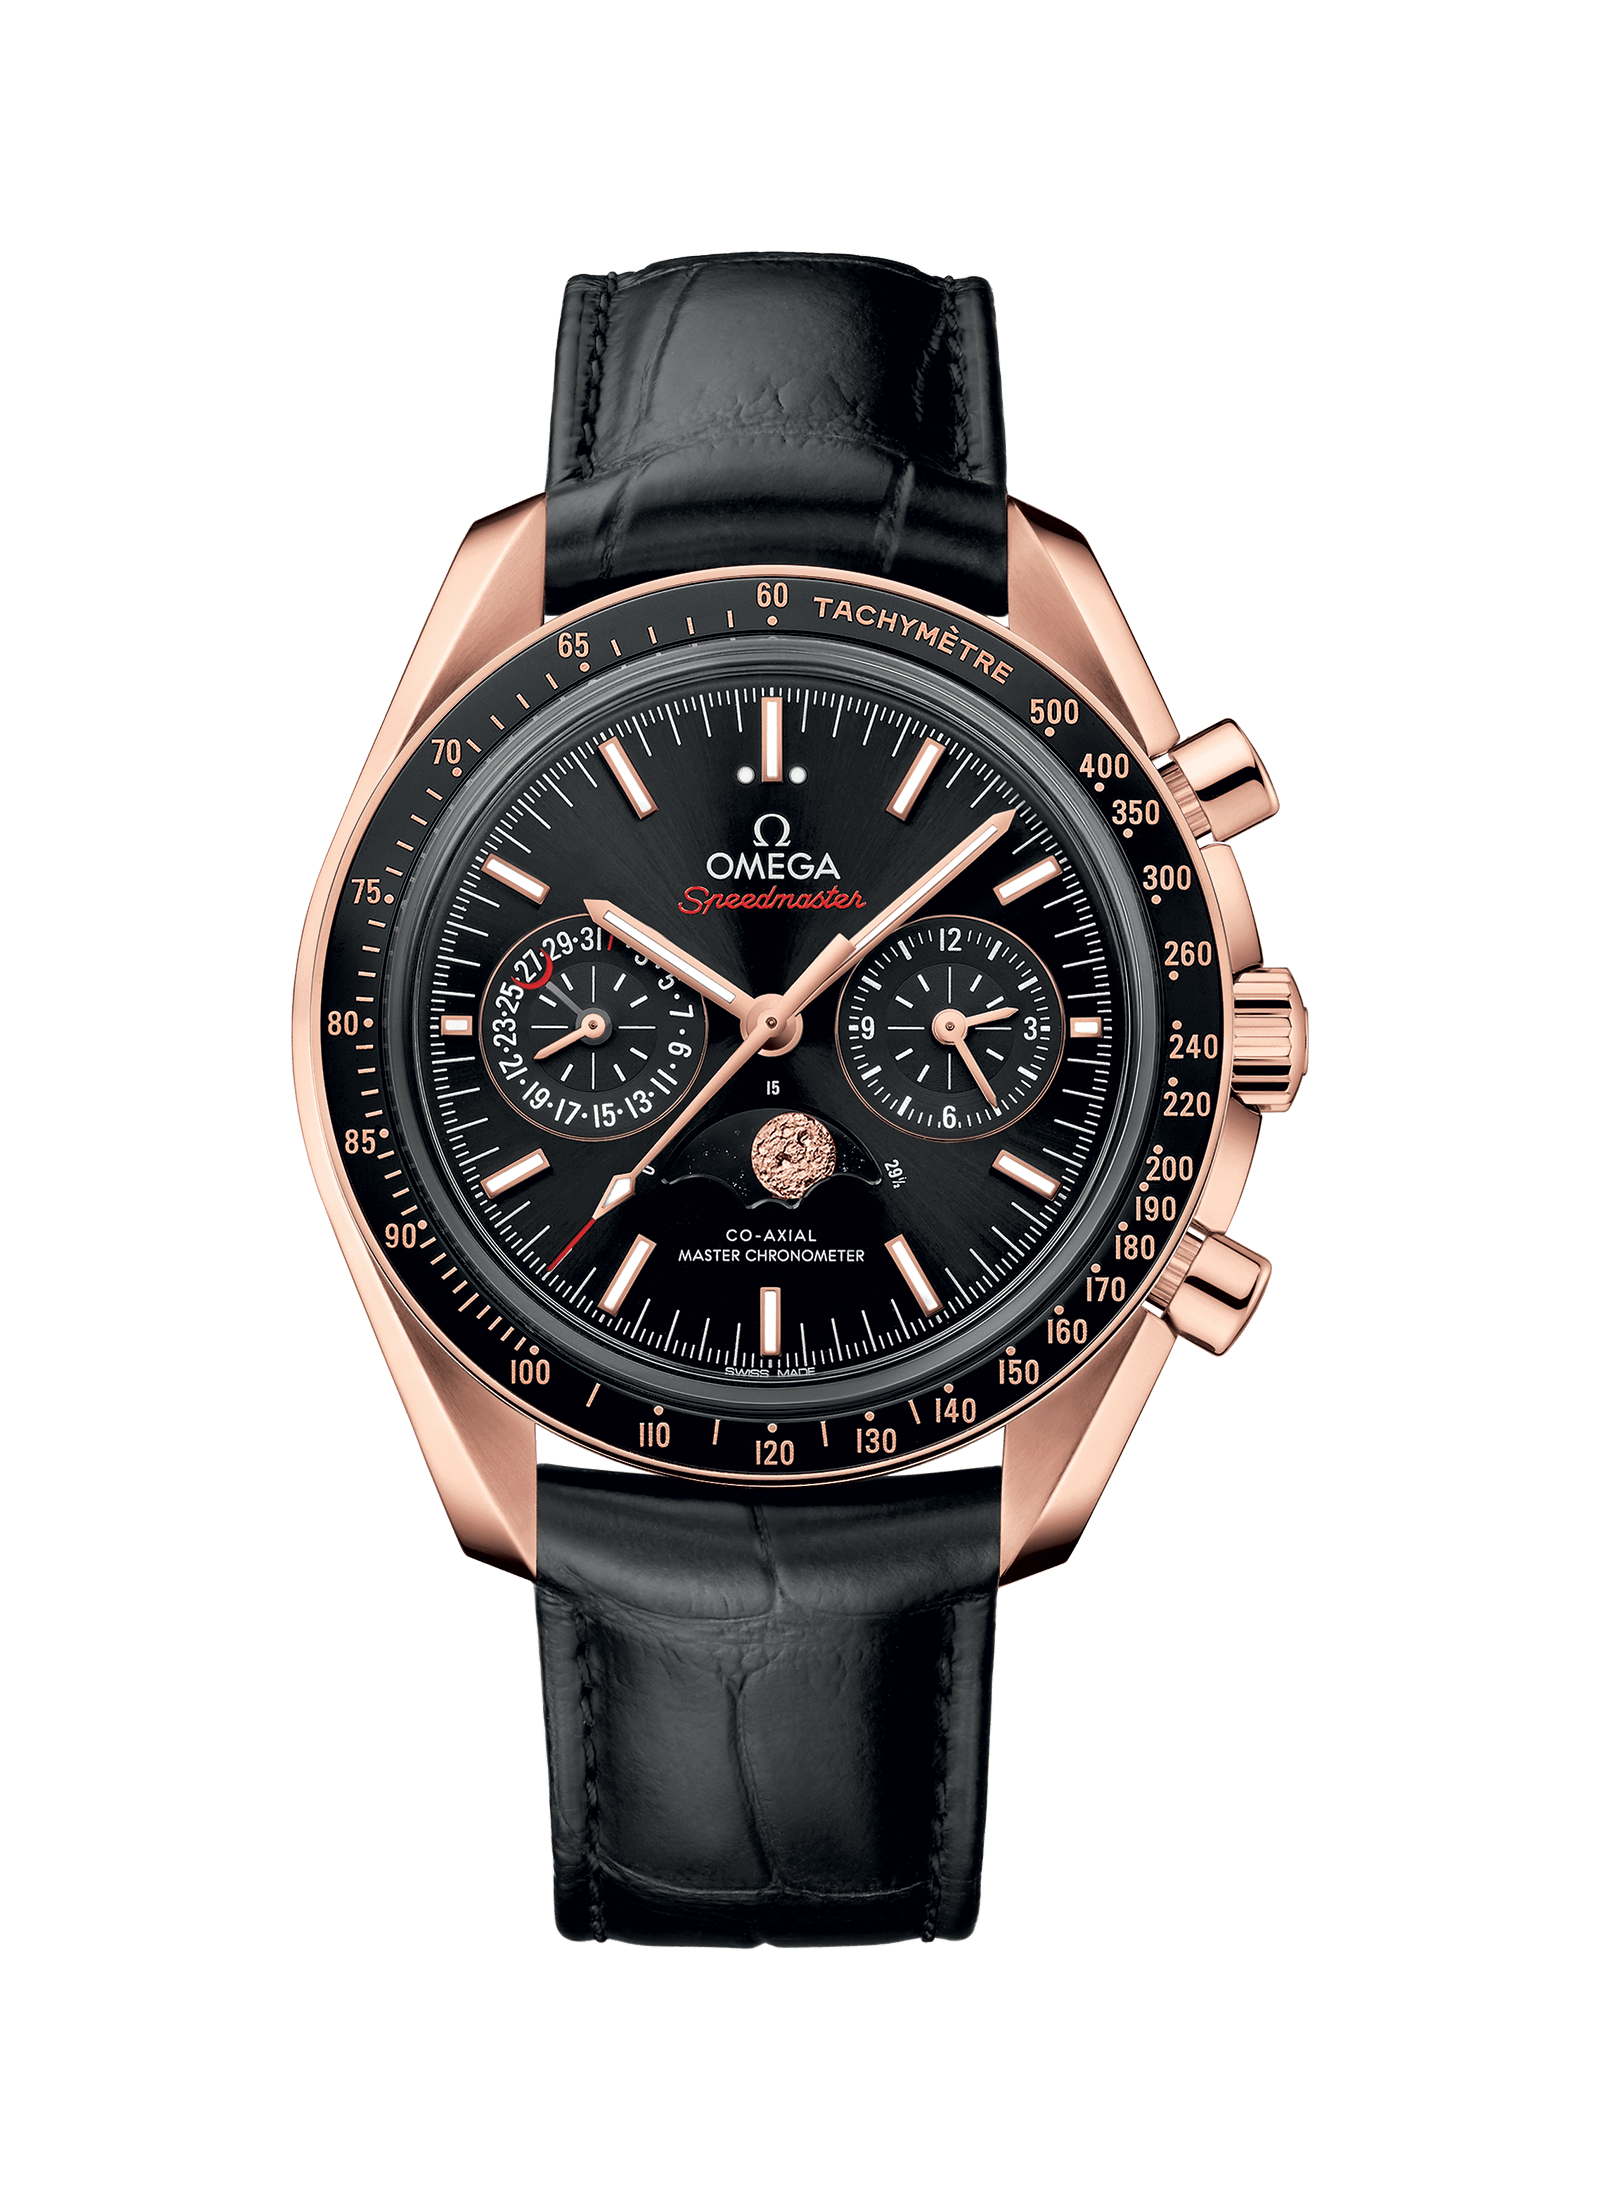 Men's watch / unisex  OMEGA, Speedmaster Moonphase Co Axial Master Chronometer Chronograph / 44.25mm, SKU: 304.63.44.52.01.001 | watchapproach.com